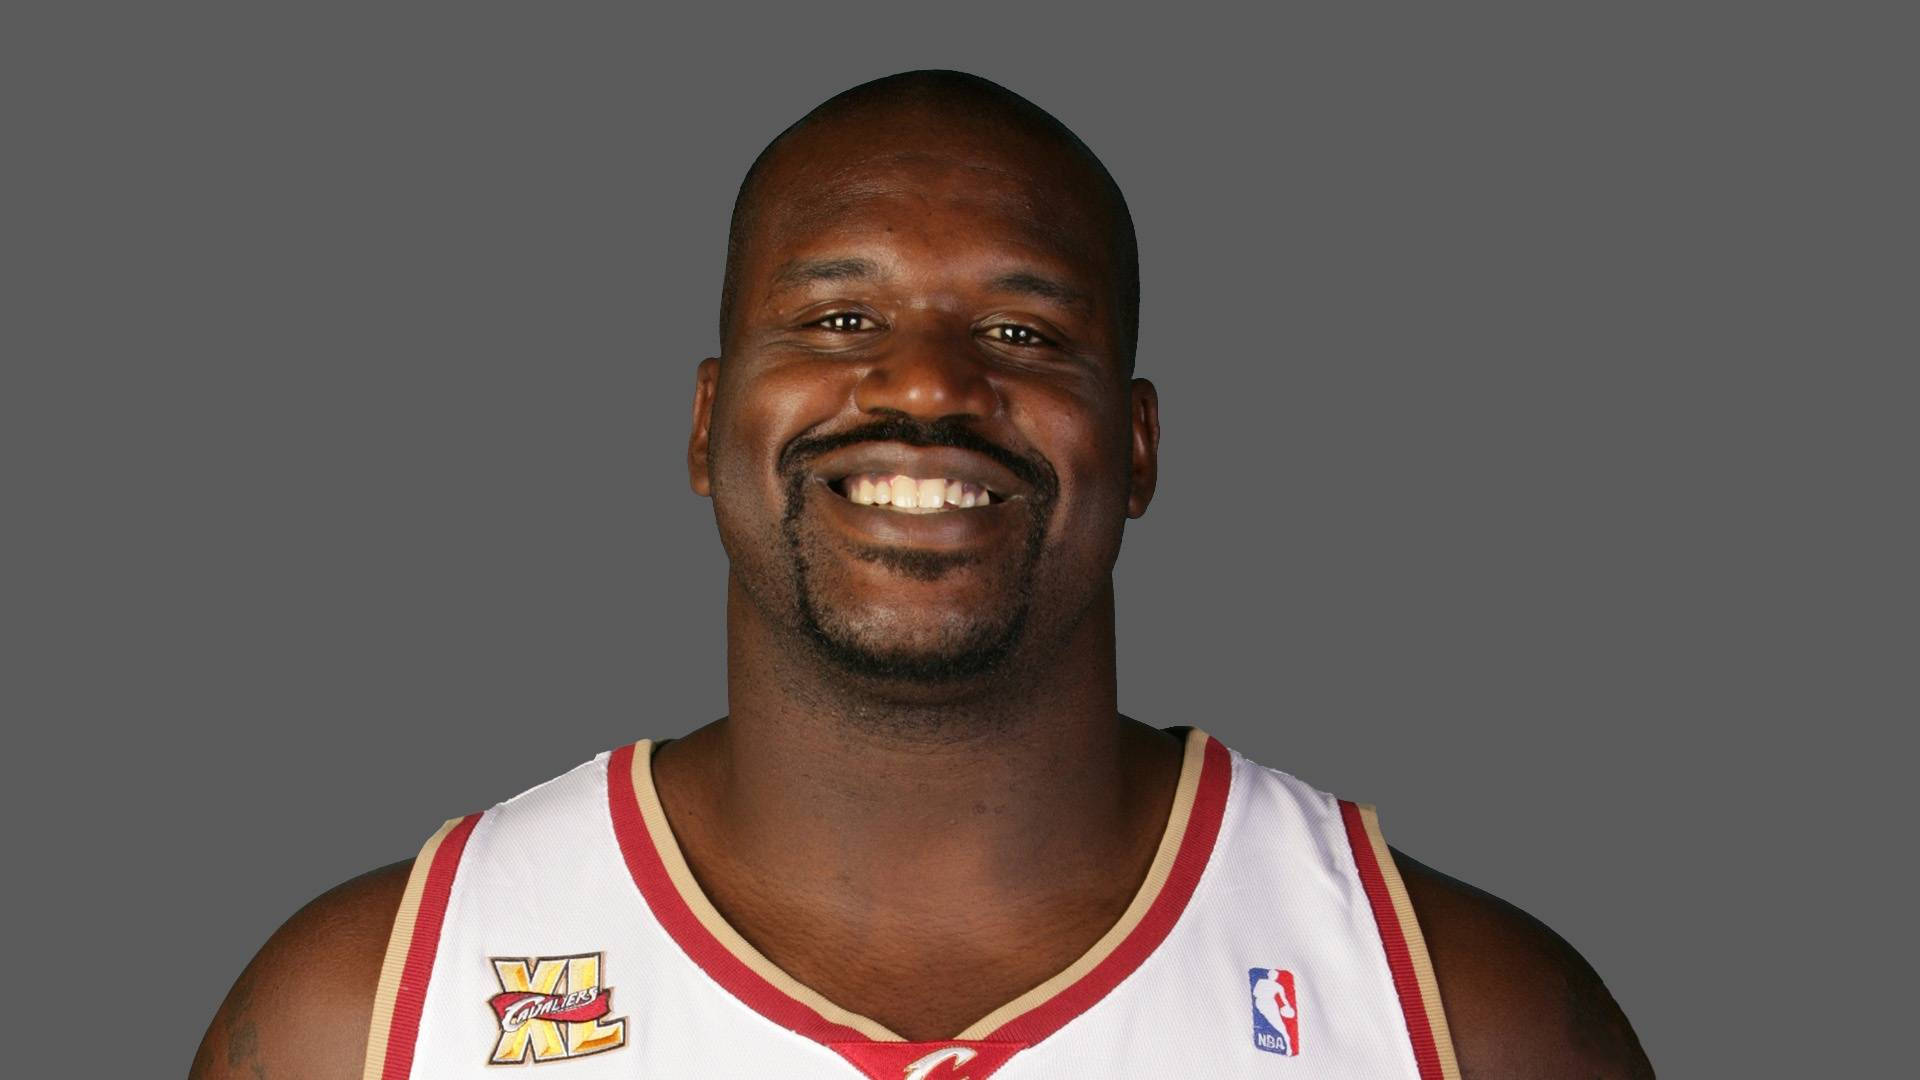 Shaquilleo'neal För Nba Cavaliers Would Be The Translation. Wallpaper